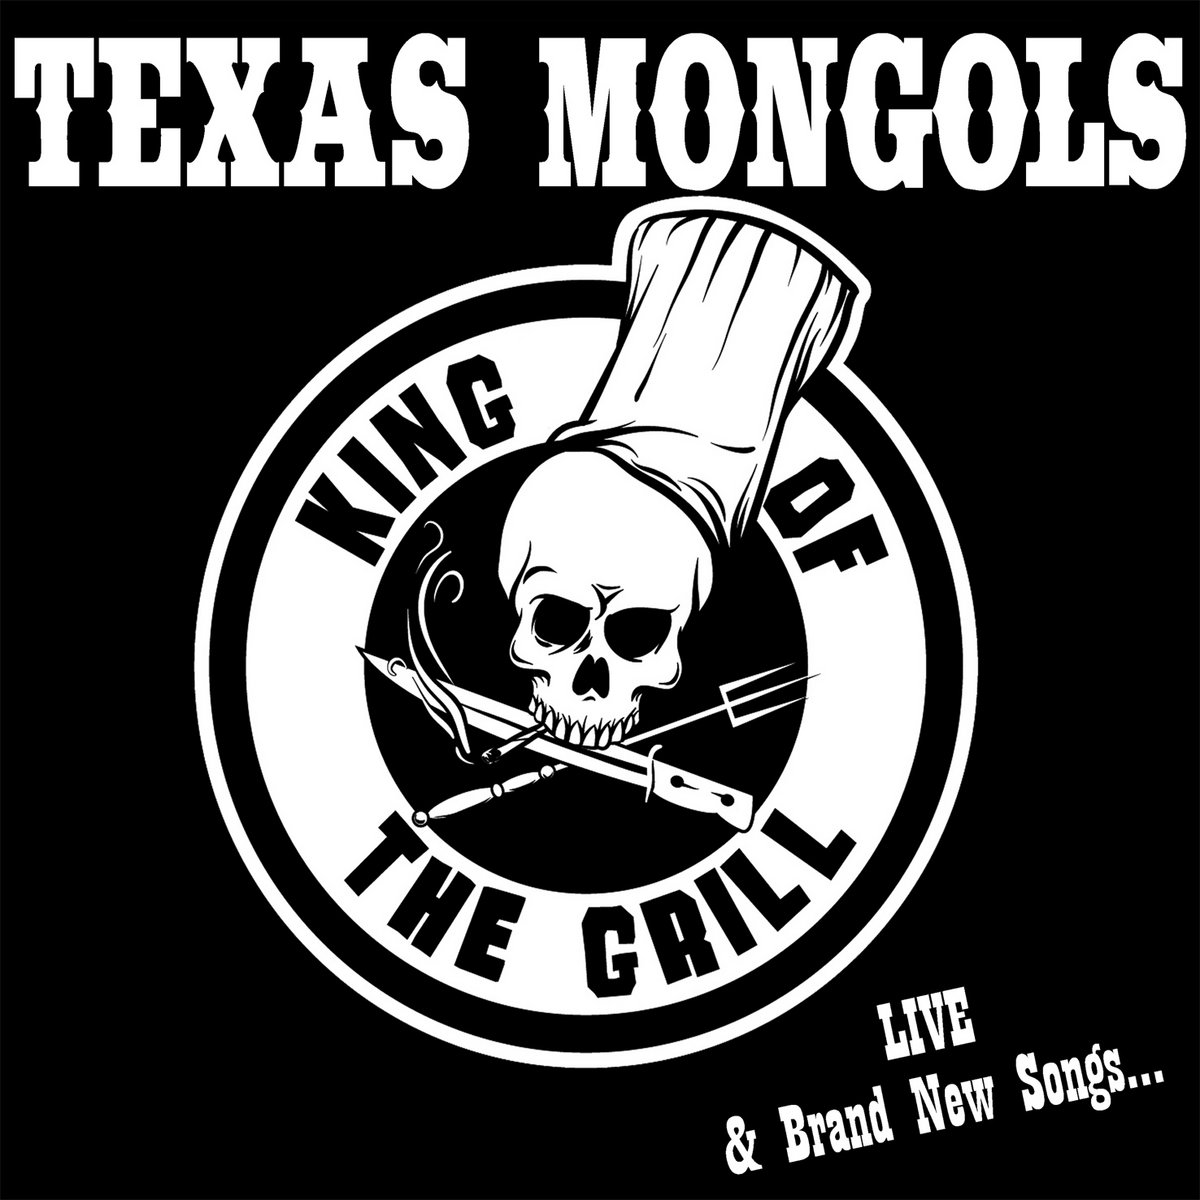 Live & Brand New Songs... / Texas Mongols | 